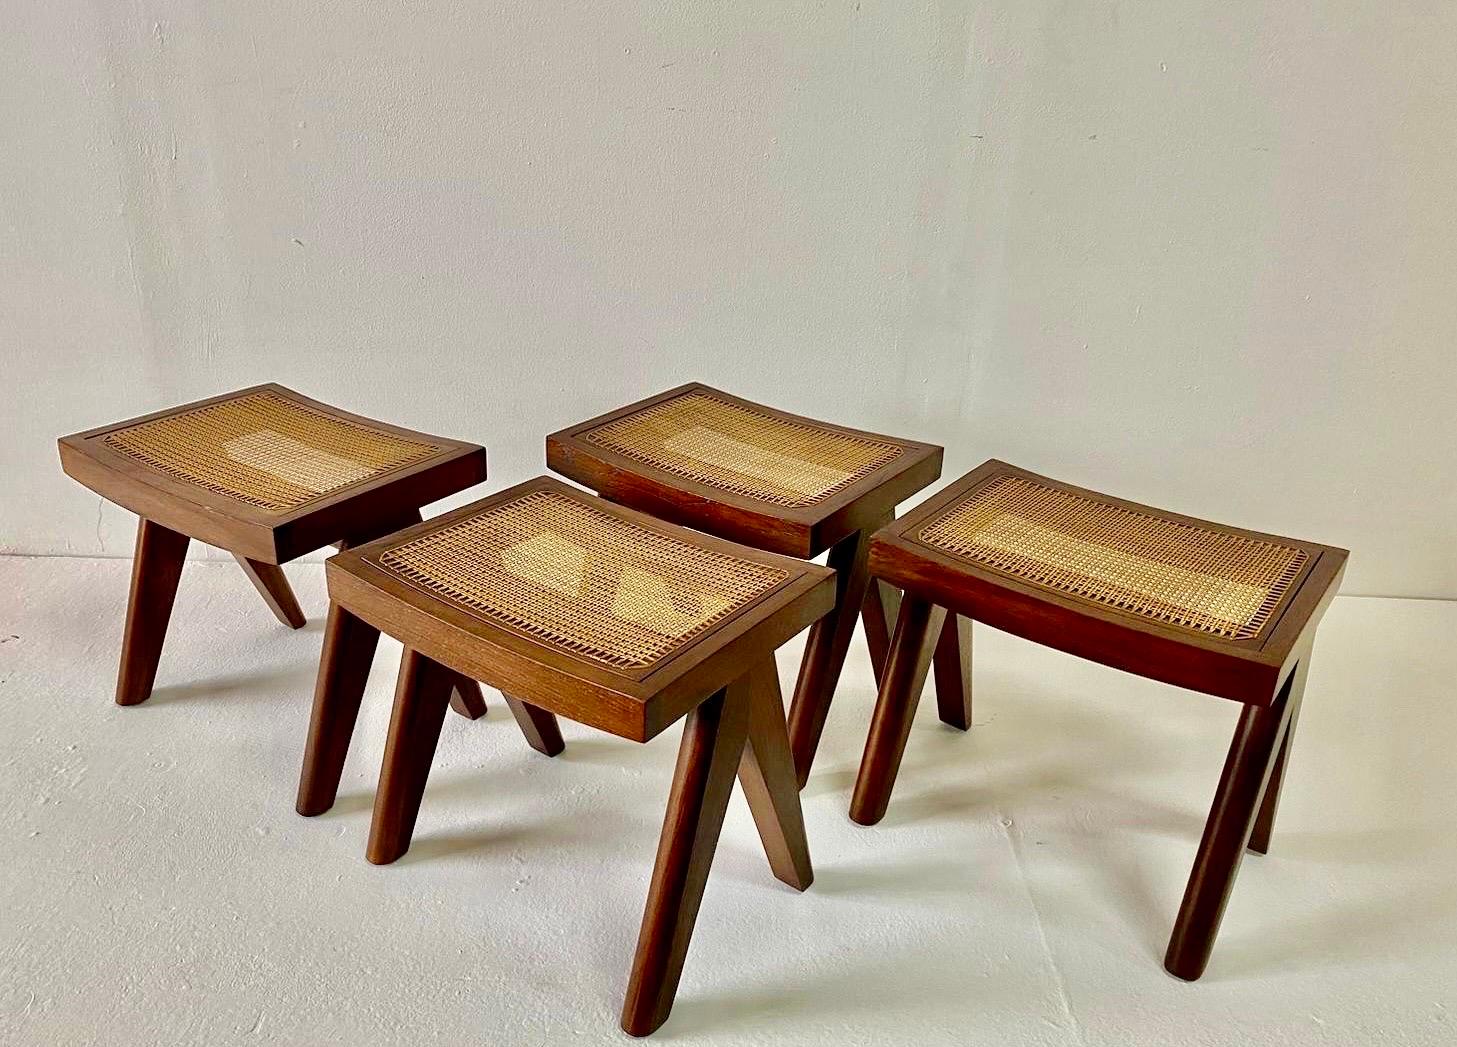 Studio Made Heavy Teak Stools - Manner of Jeanneret (2 Pairs Available) For Sale 8